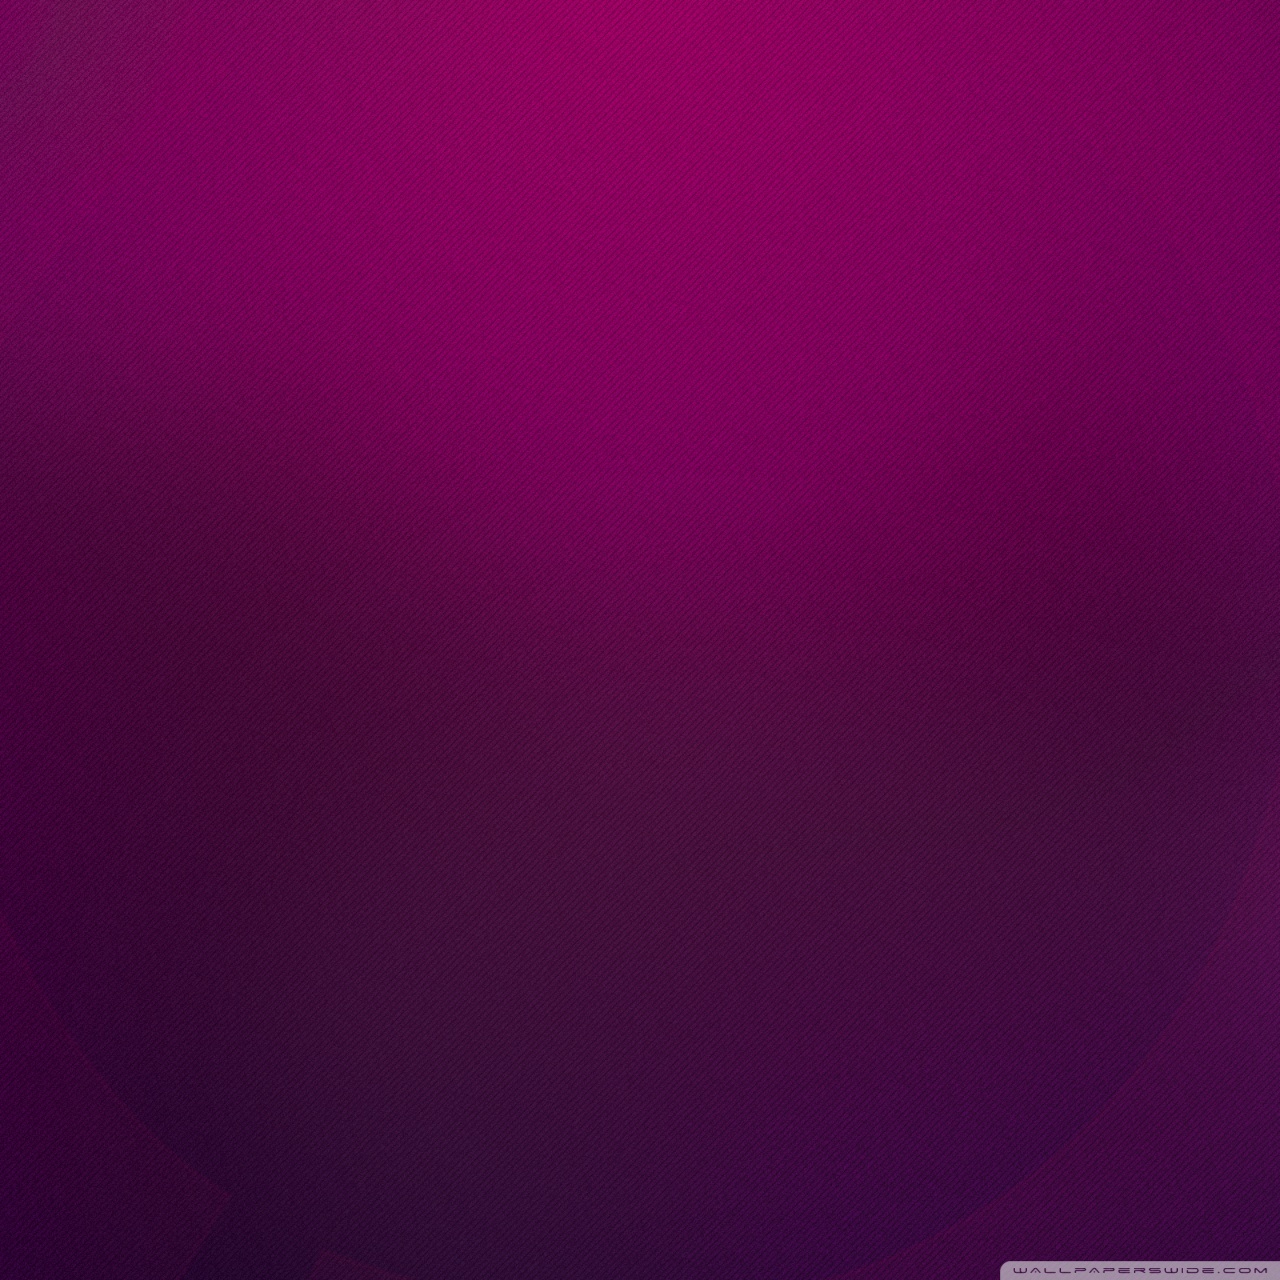 plain wallpaper for android,violet,purple,red,pink,magenta